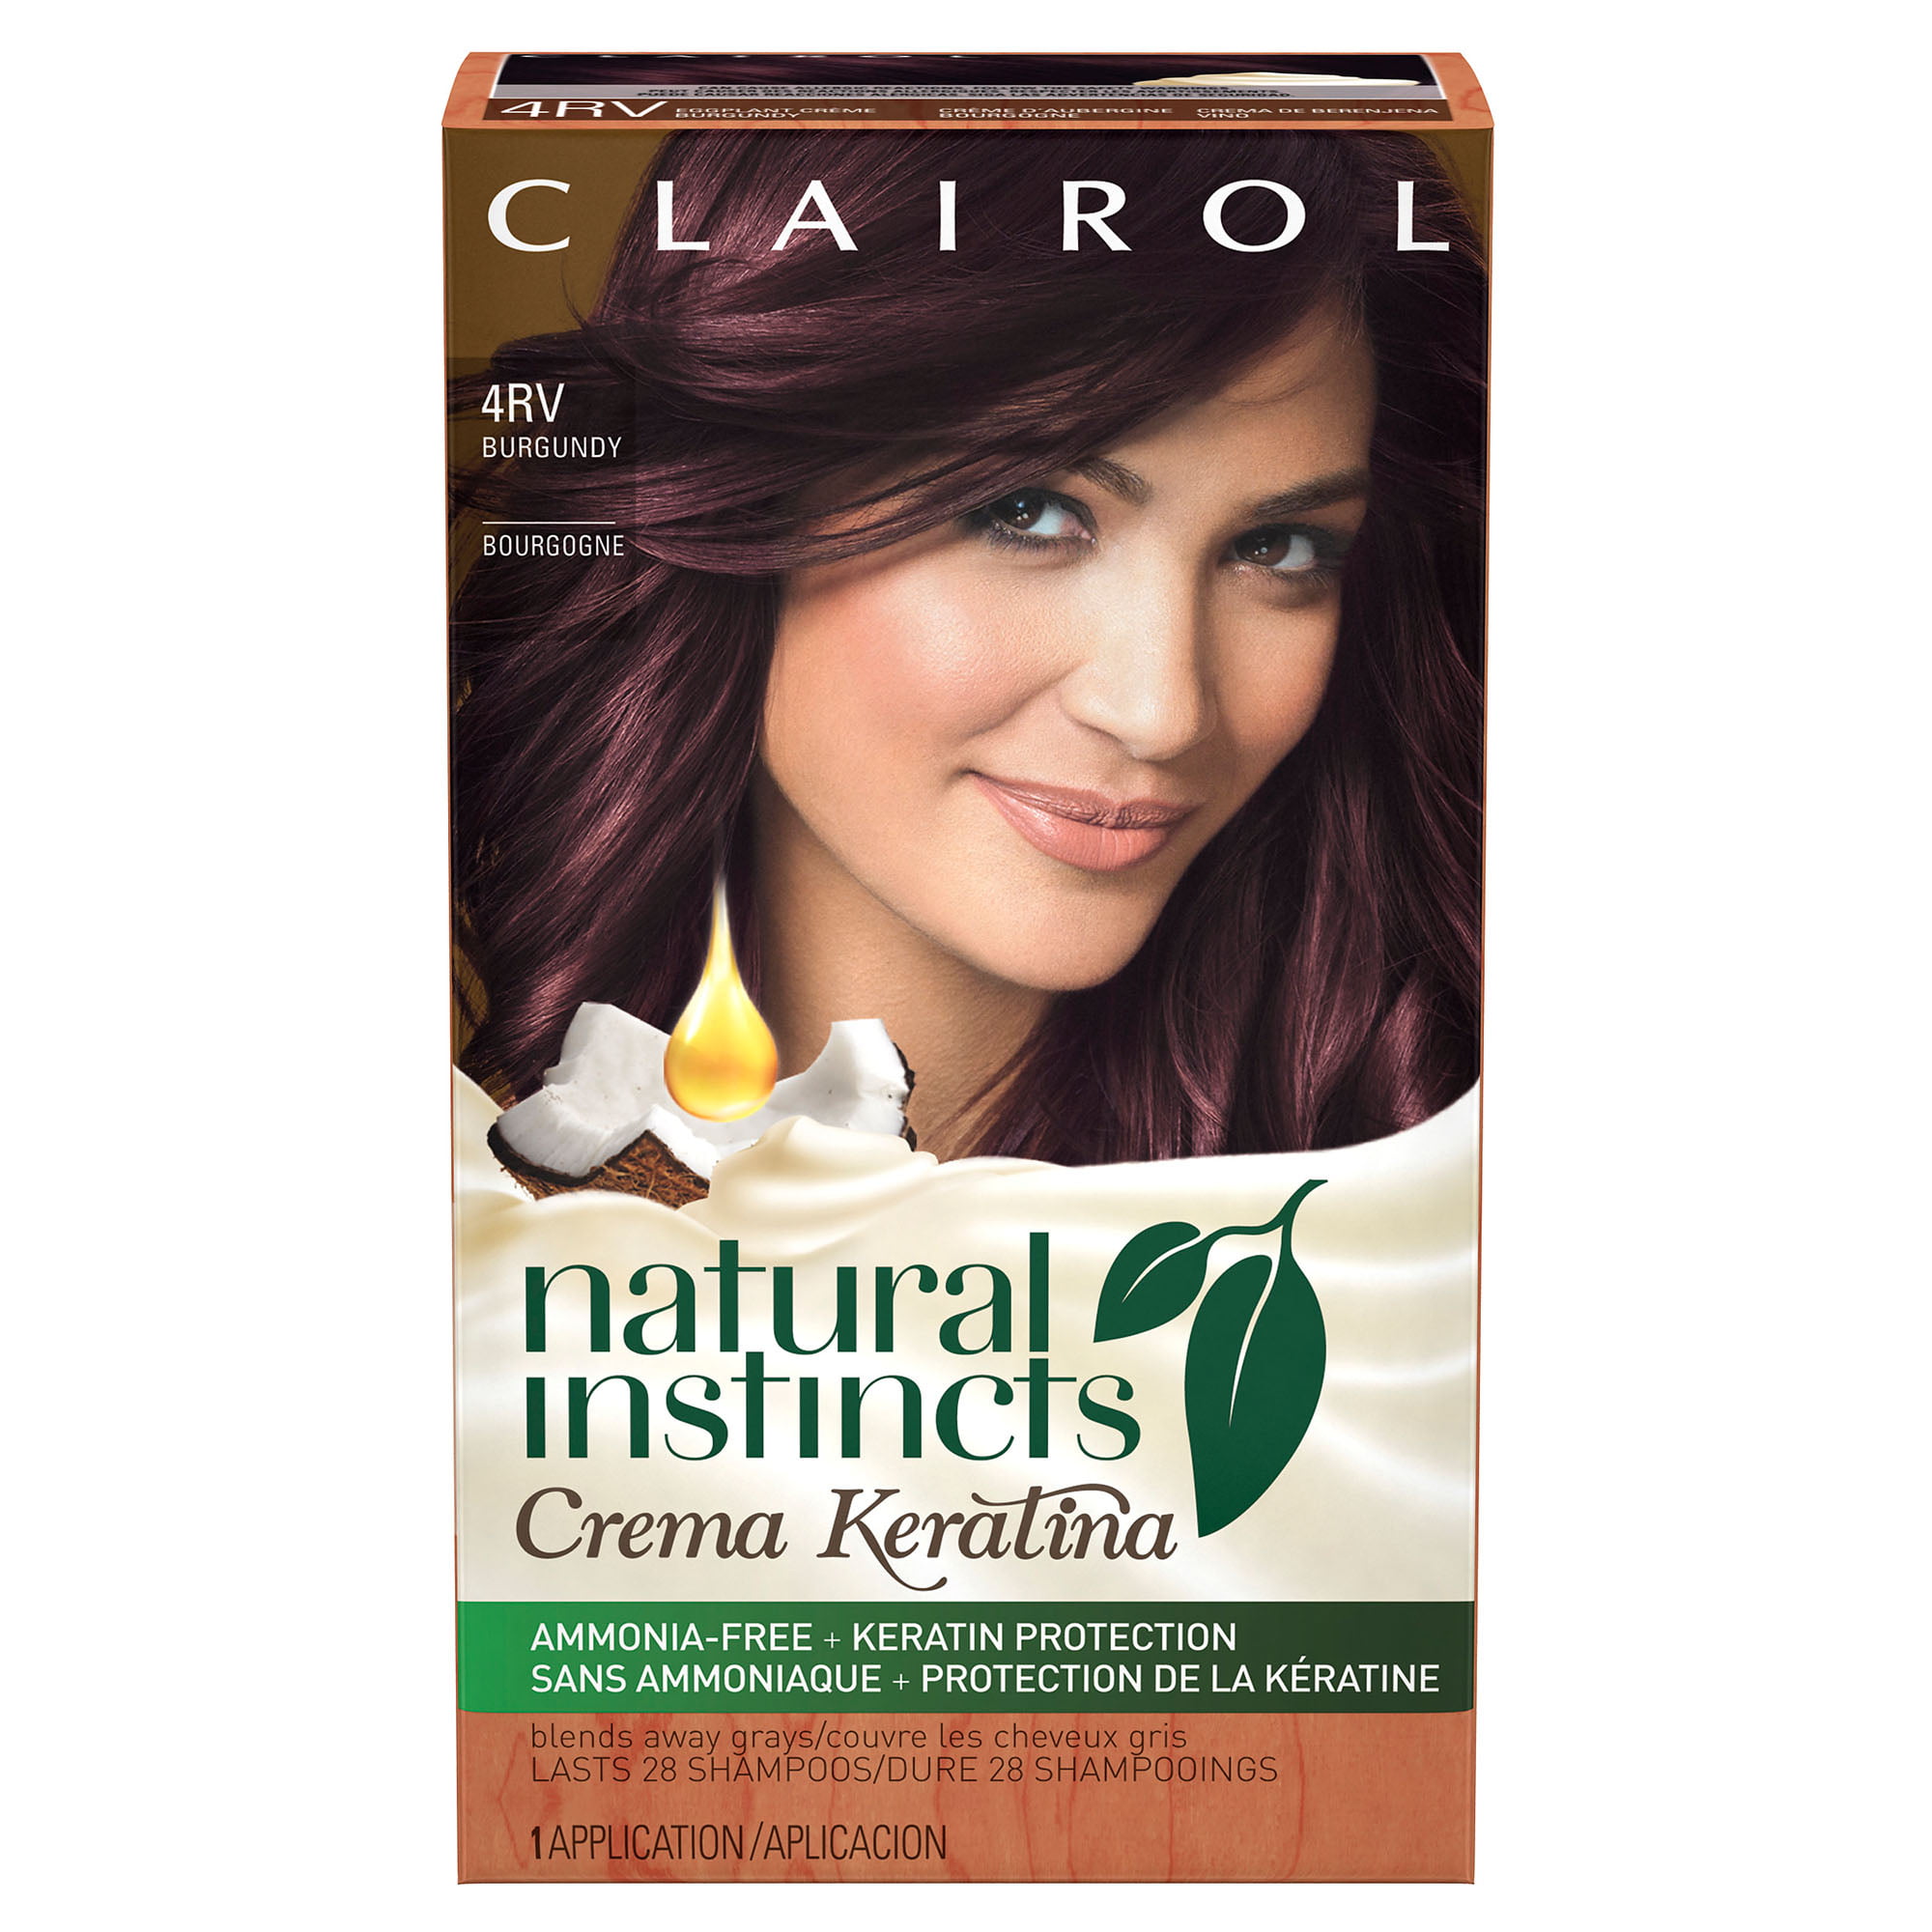 clairol natural instincts